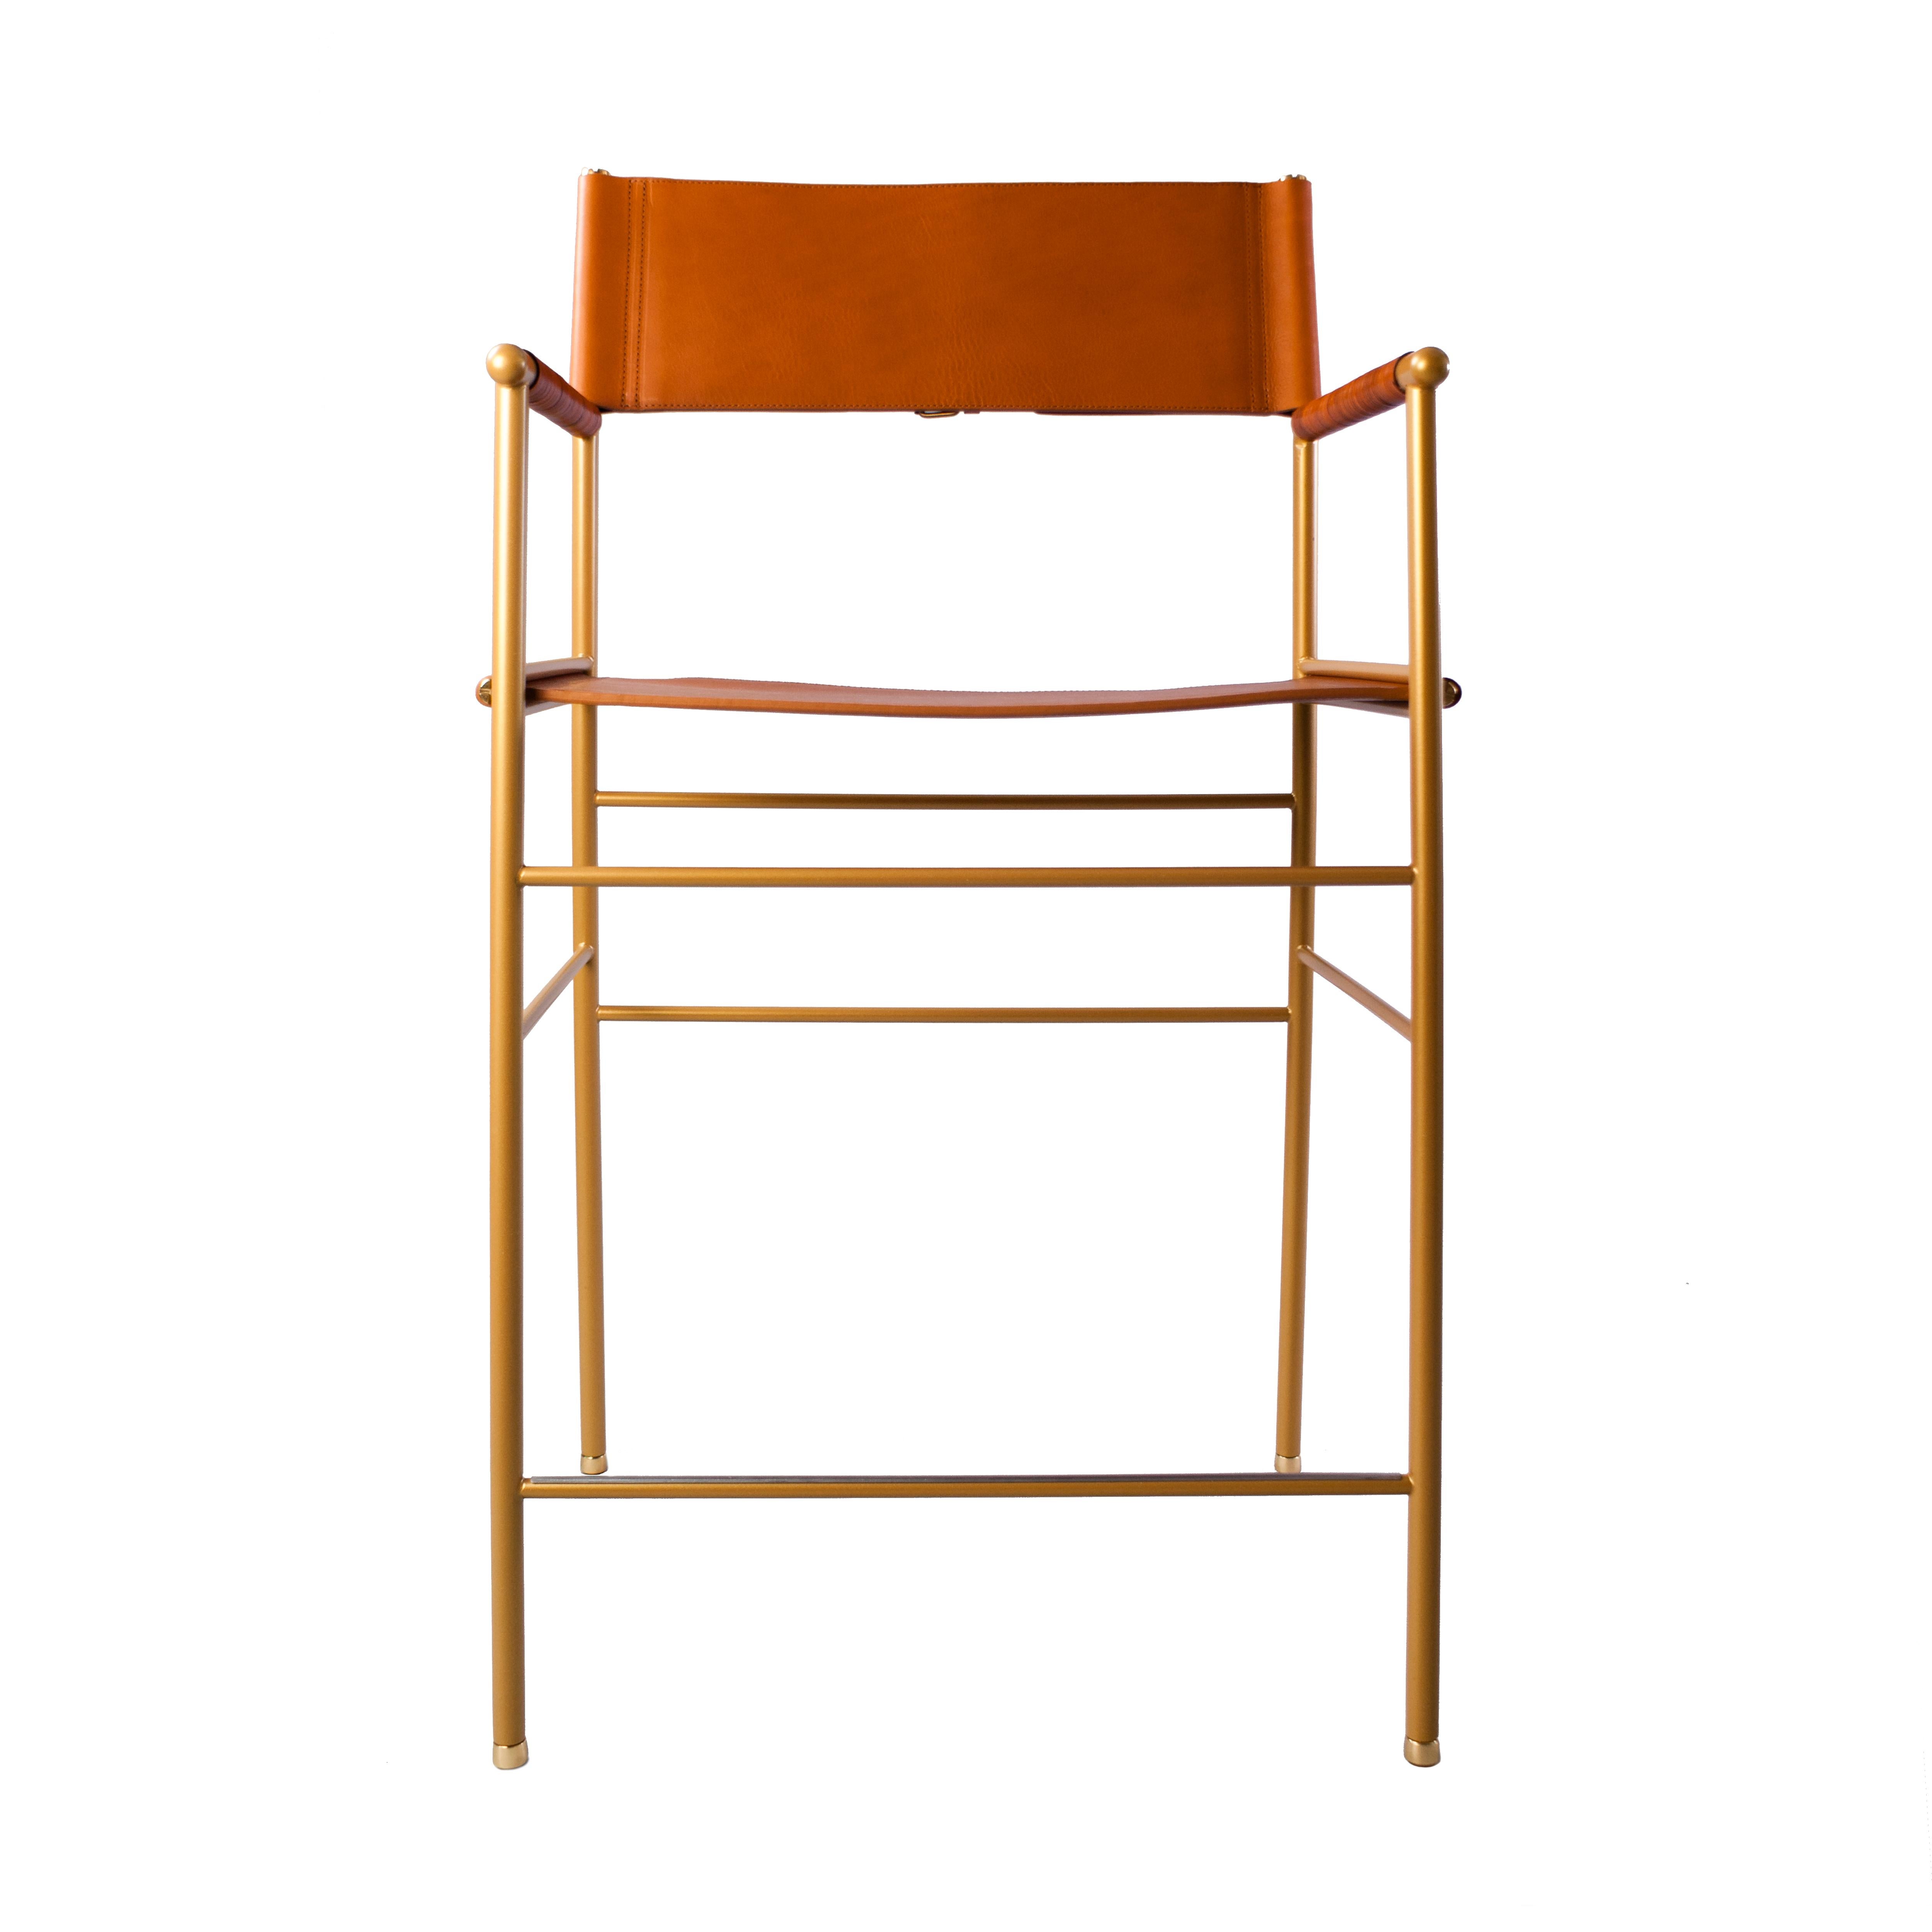 Repose Bar Stool w. Backrest, Tan Leather & Aged Brass Powdered Coating Frame For Sale 2